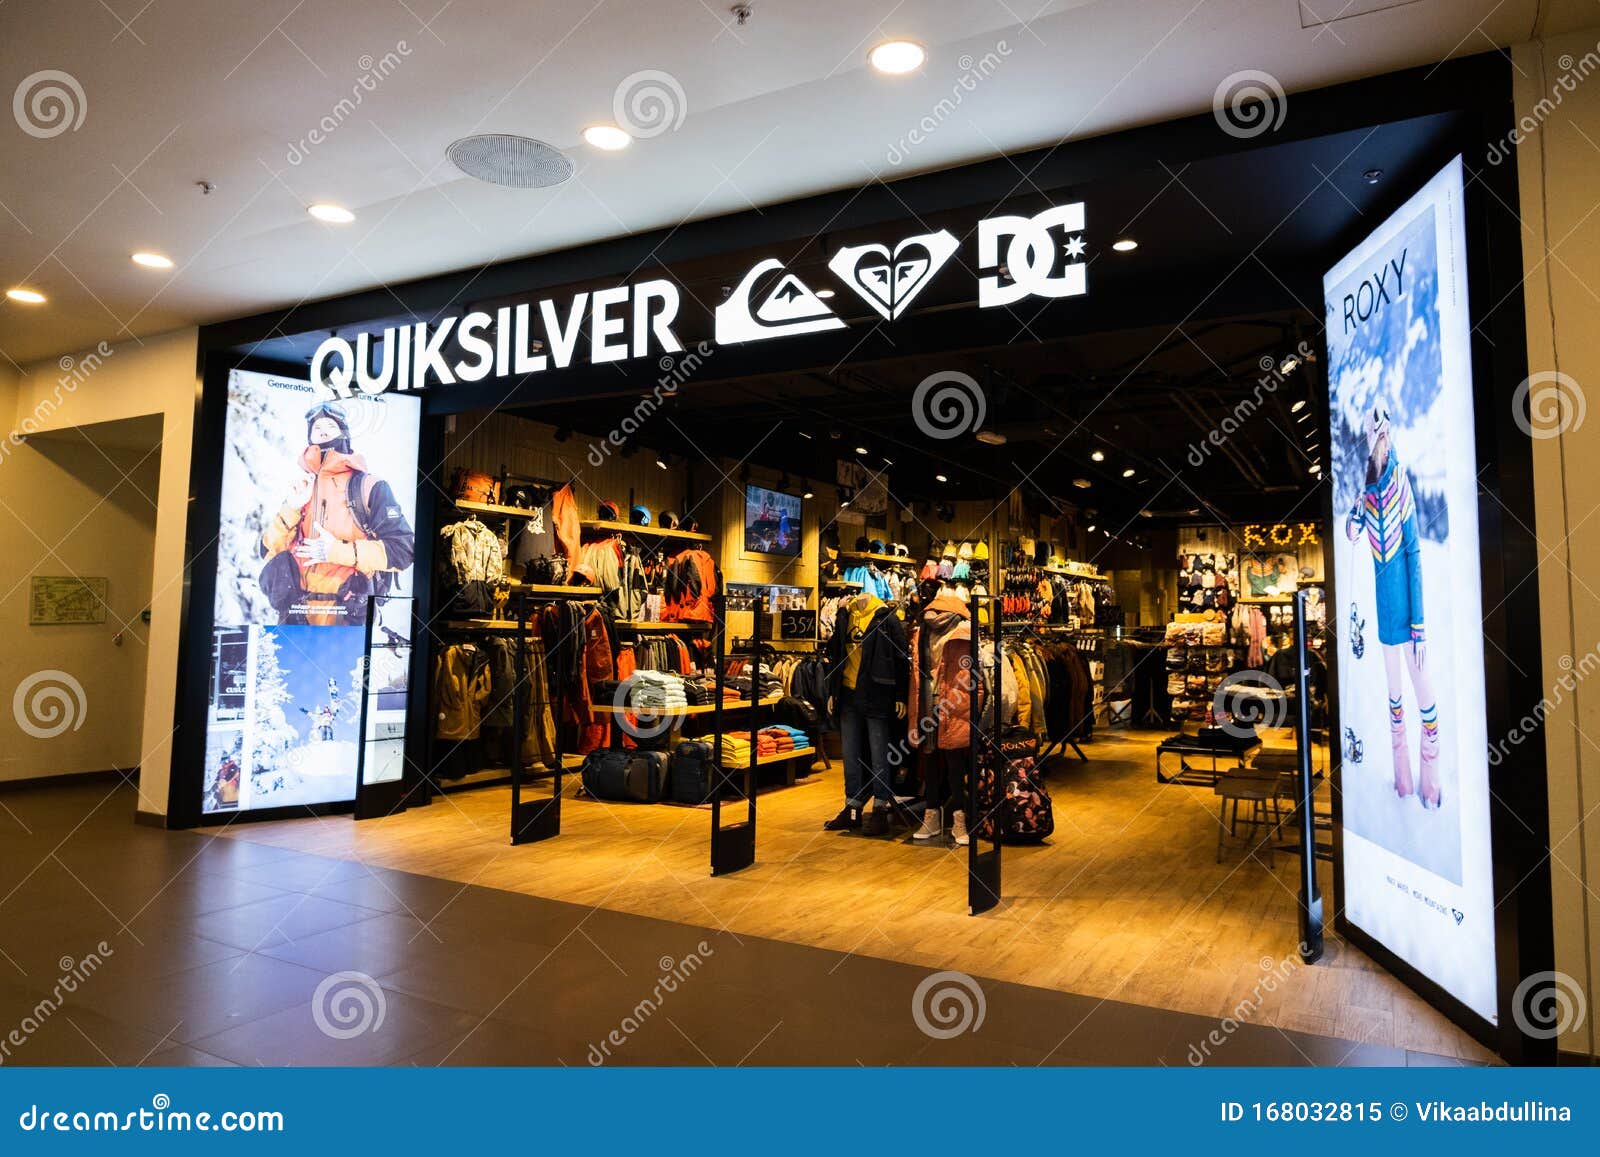 Quiksilver and DC Store in Galeria Shopping Mall in Saint Petersburg,  Russia. Editorial Image - Image of apparel, clothes: 168032815